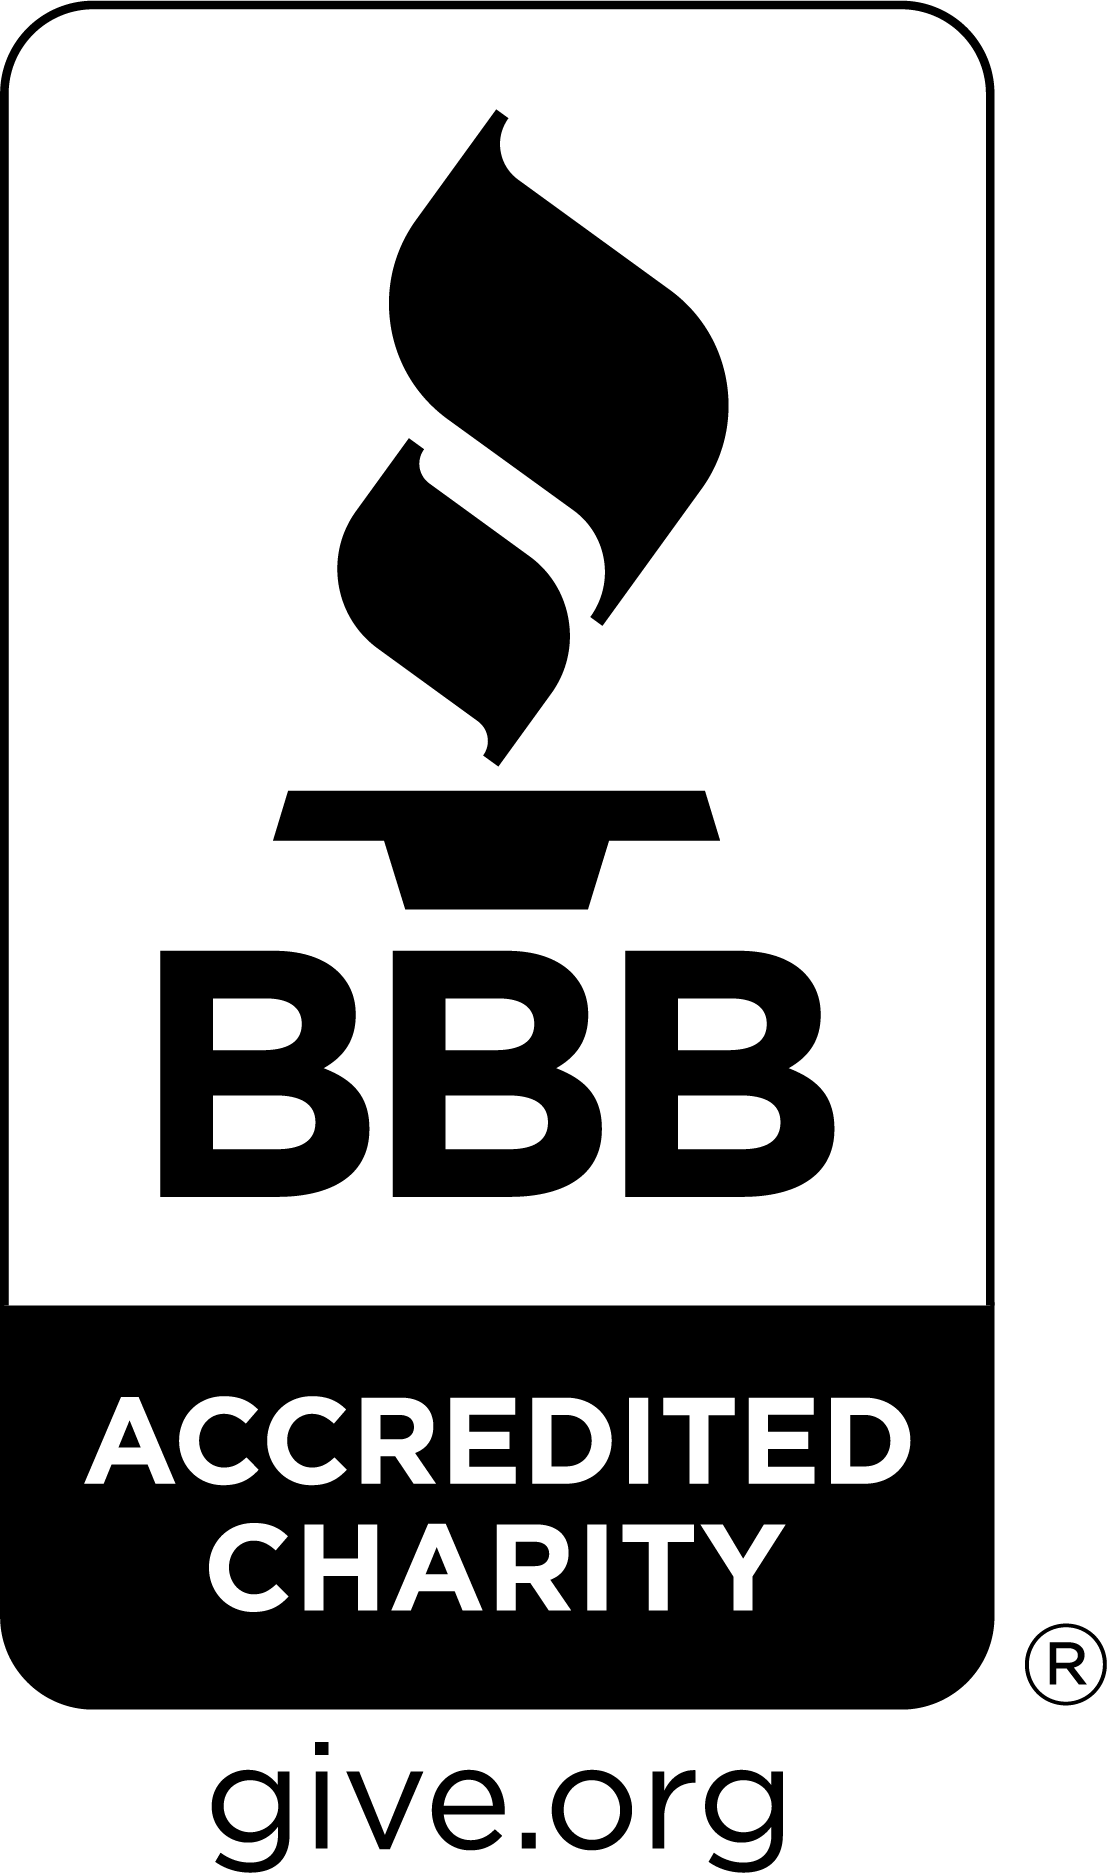 Better Business Bureau accredited charity.